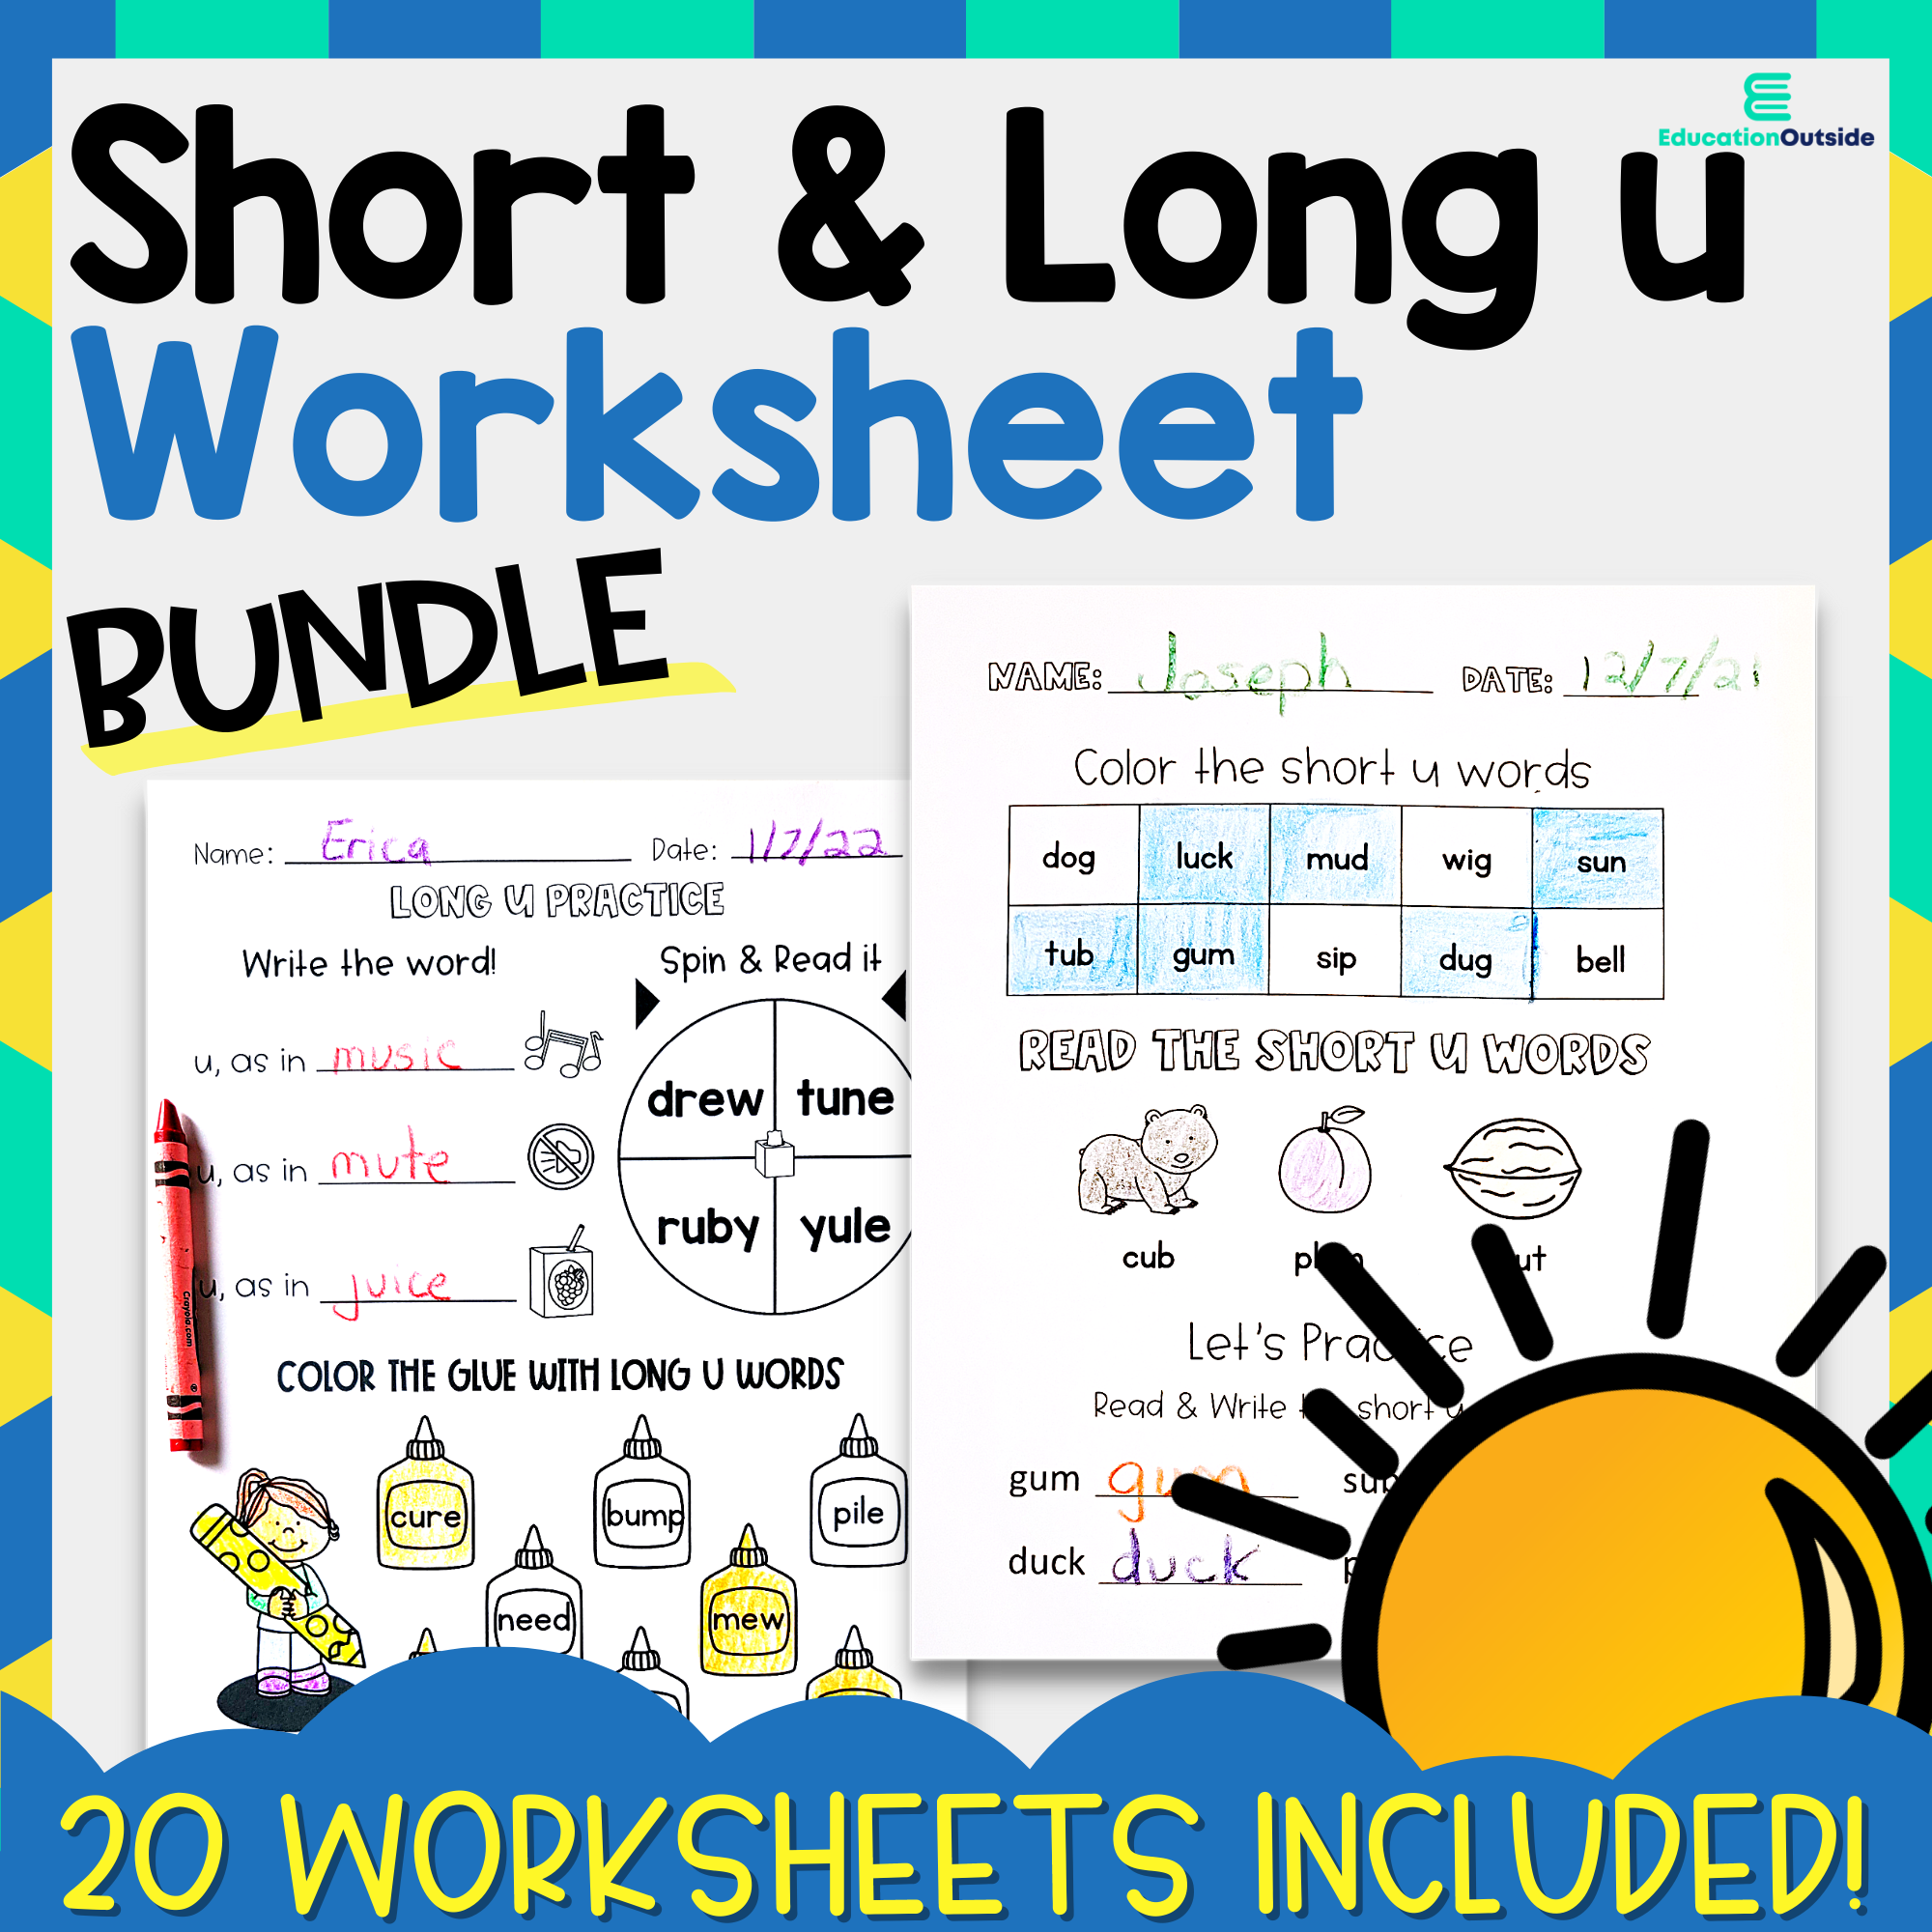 Long and short vowel sounds sorting printables for preschool and 